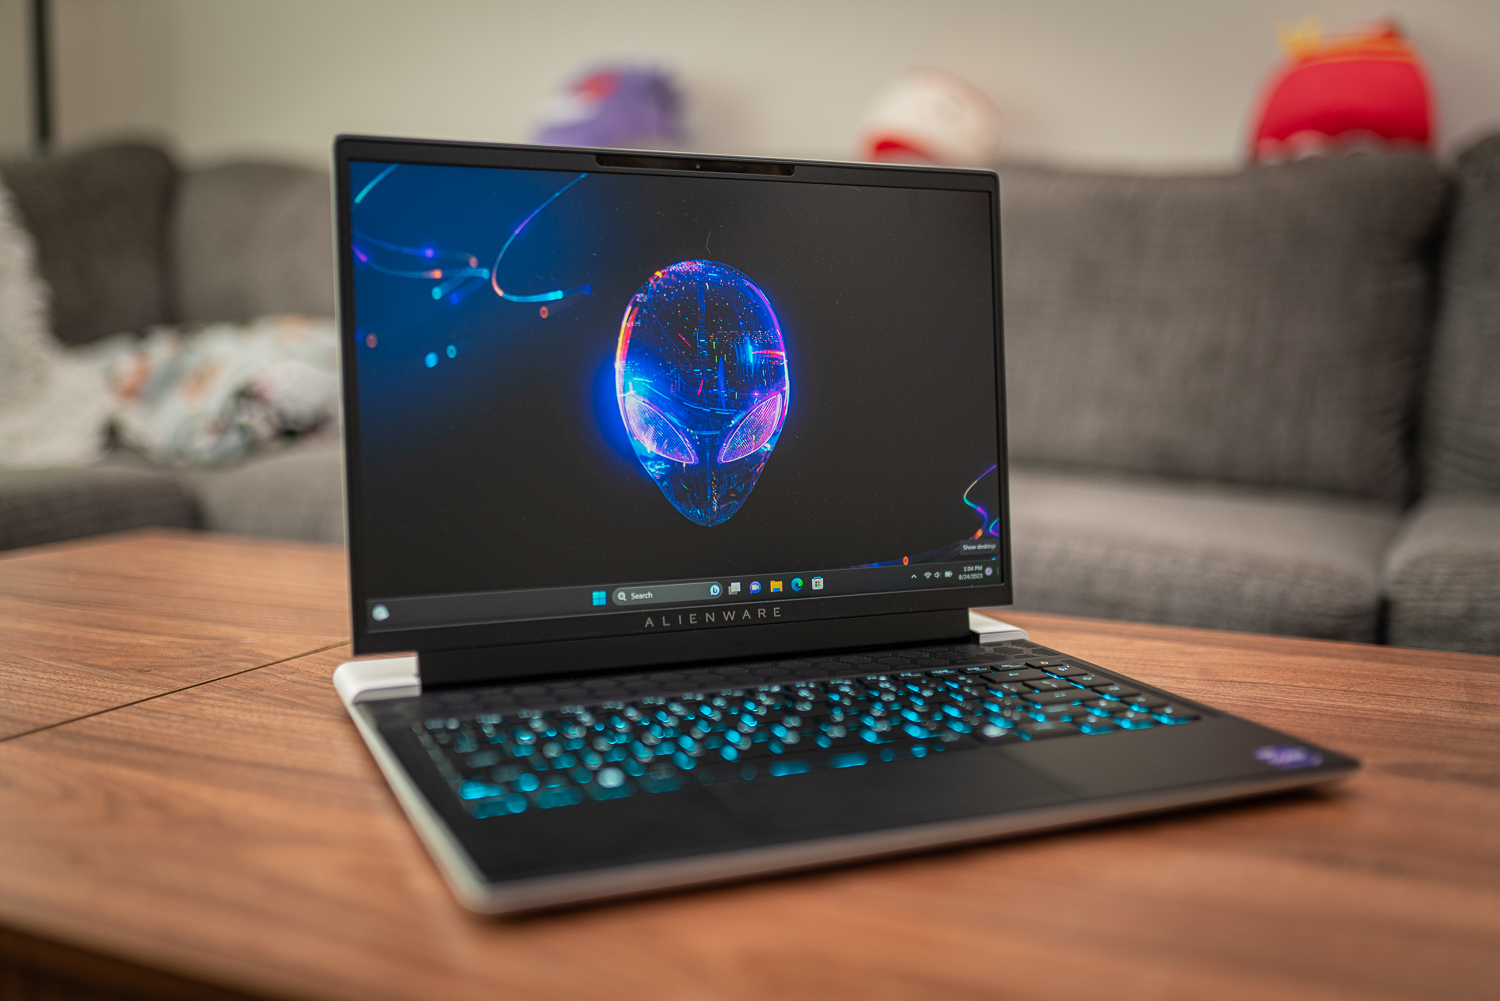 The Alienware x14 R2 gaming laptop on a desk.